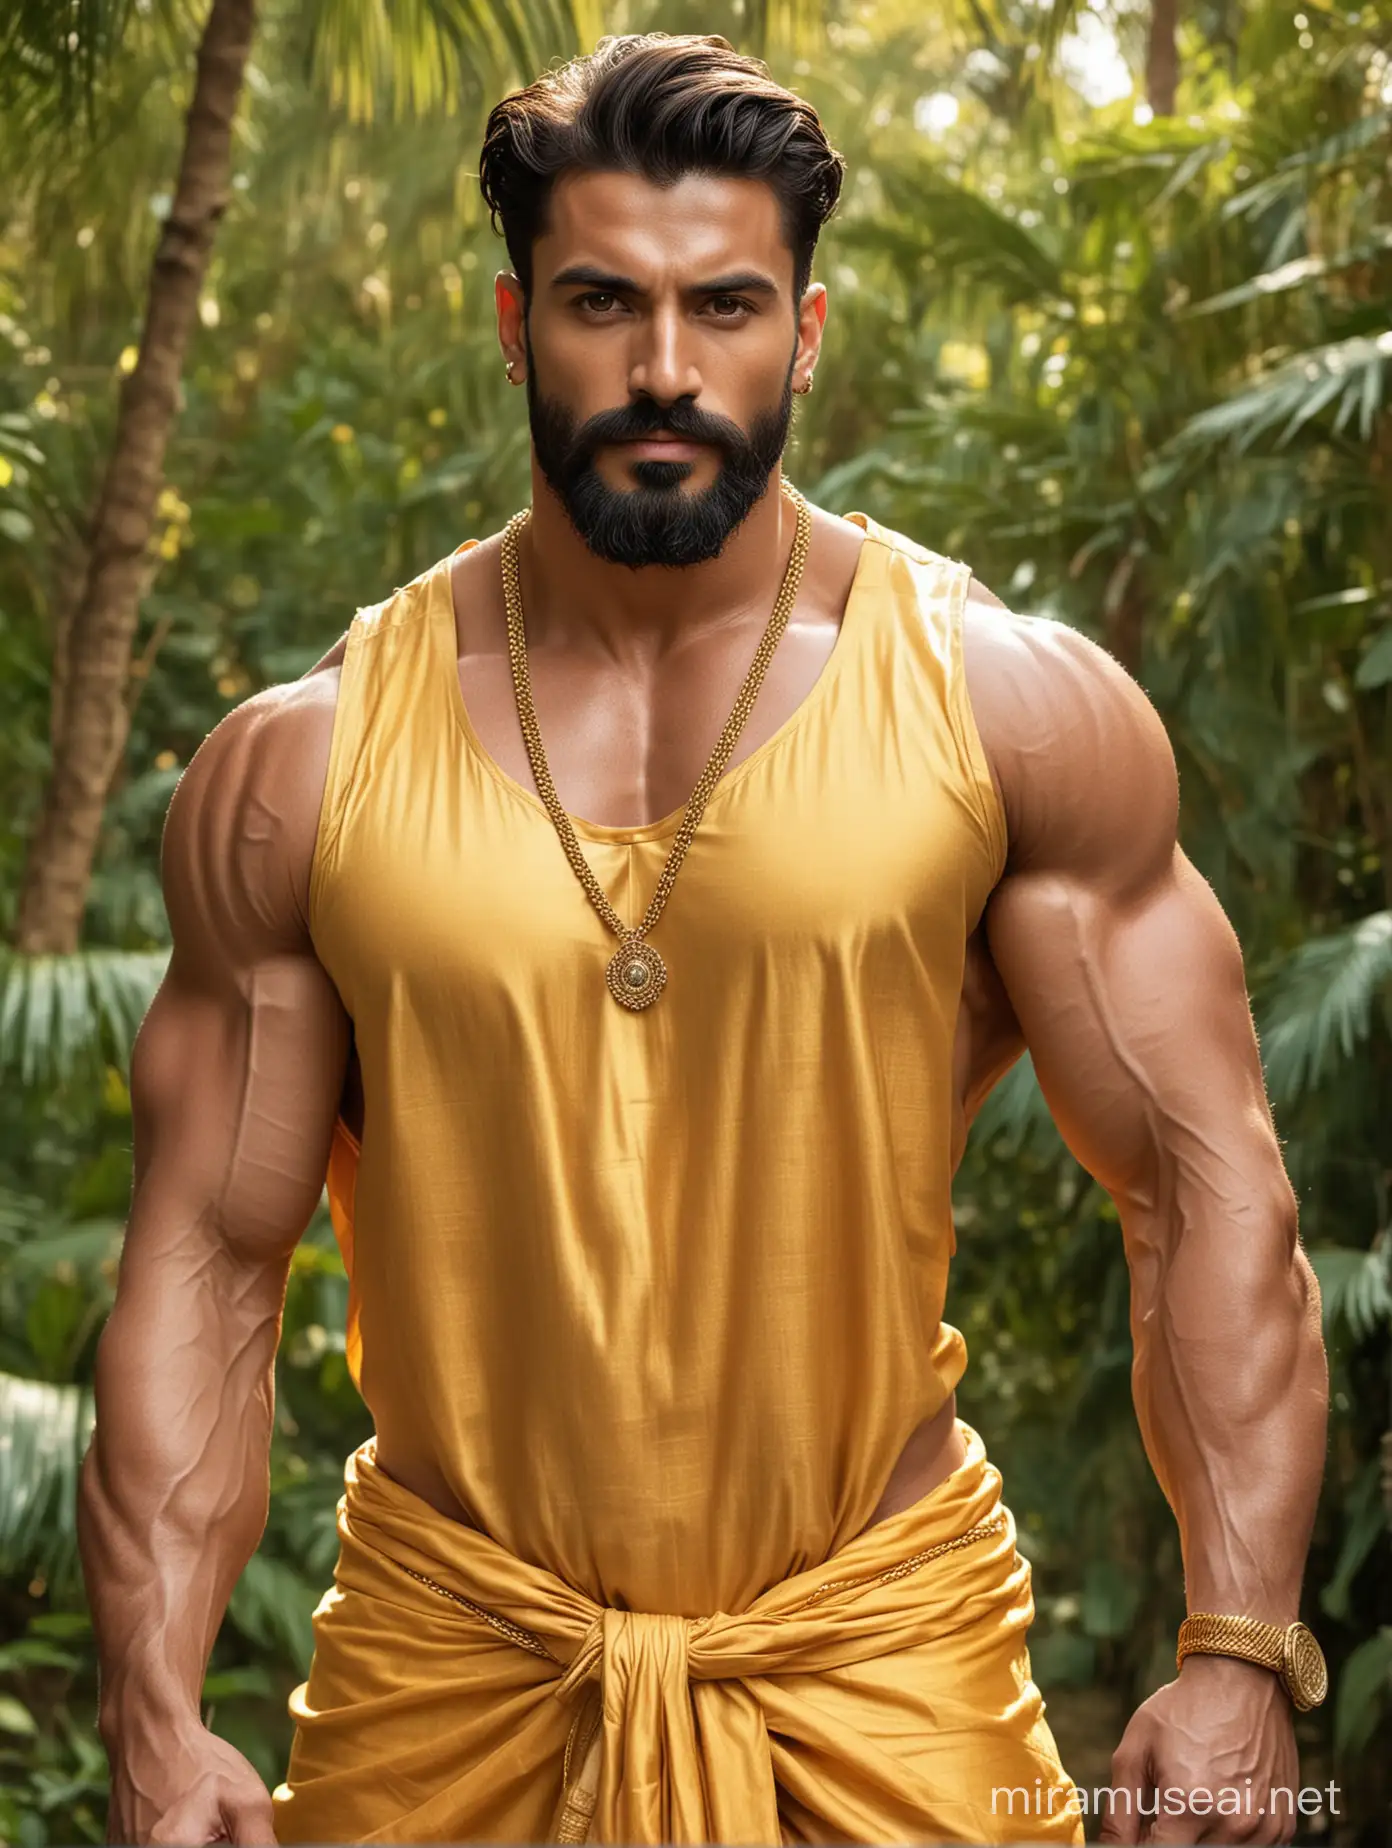 Tall and handsome bodybuilder king with beautiful hairstyle and beard with attractive eyes and Big wide shoulder in golden dhoti with golden necklace and showing his big biceps in jungle